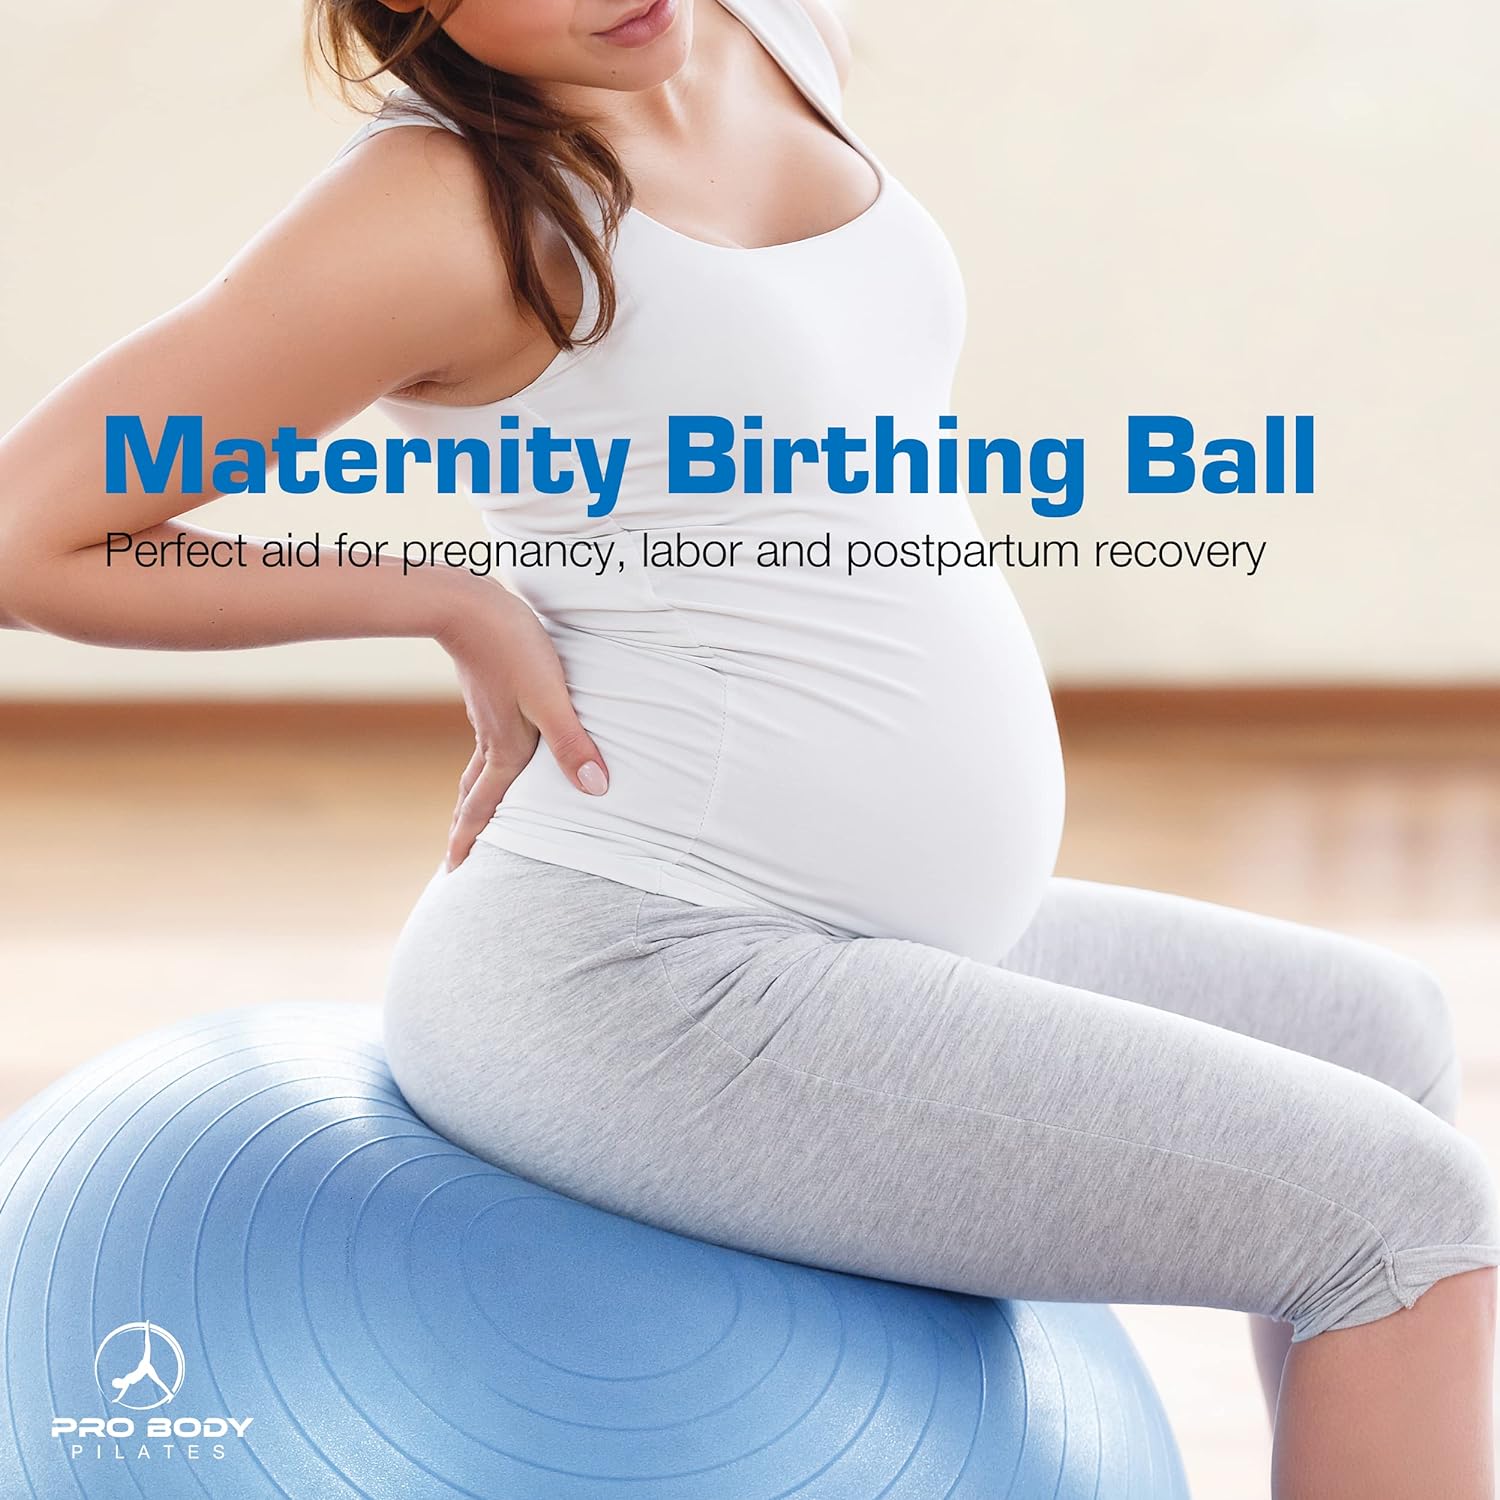 Ball Exercise Ball Yoga Ball, Multiple Sizes Stability Ball Chair, Large Gym Grade Birthing Ball for Pregnancy, Fitness, Balance, Workout and Physical Therapy W/Pump